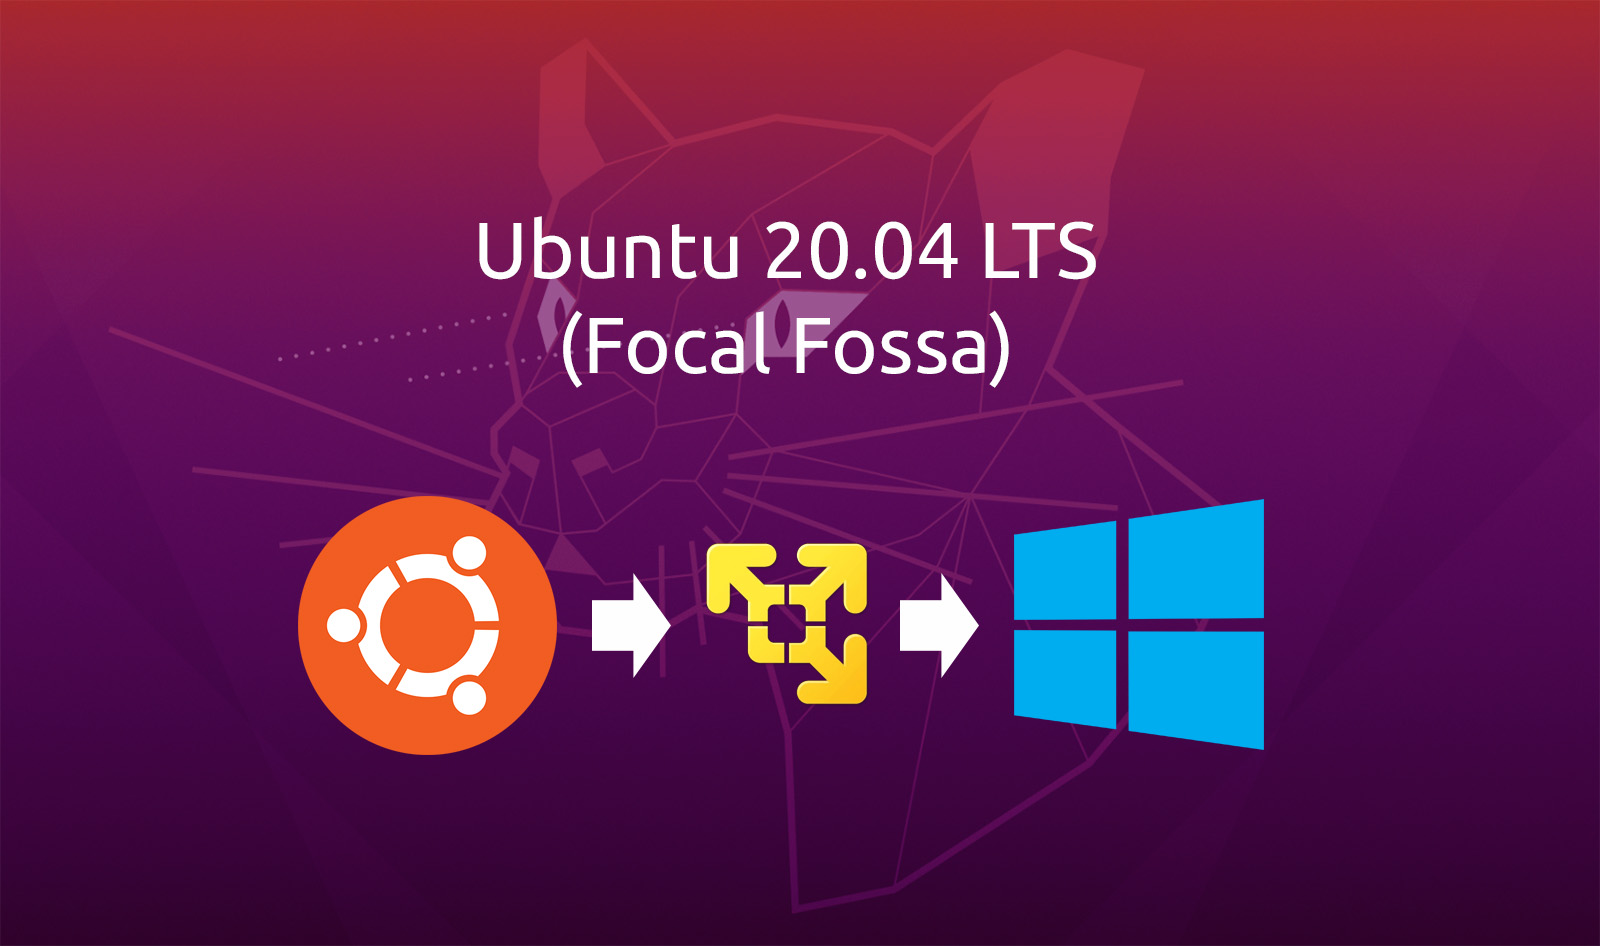 How To Install Ubuntu 20.04 LTS On Windows Using VMware Workstation Player